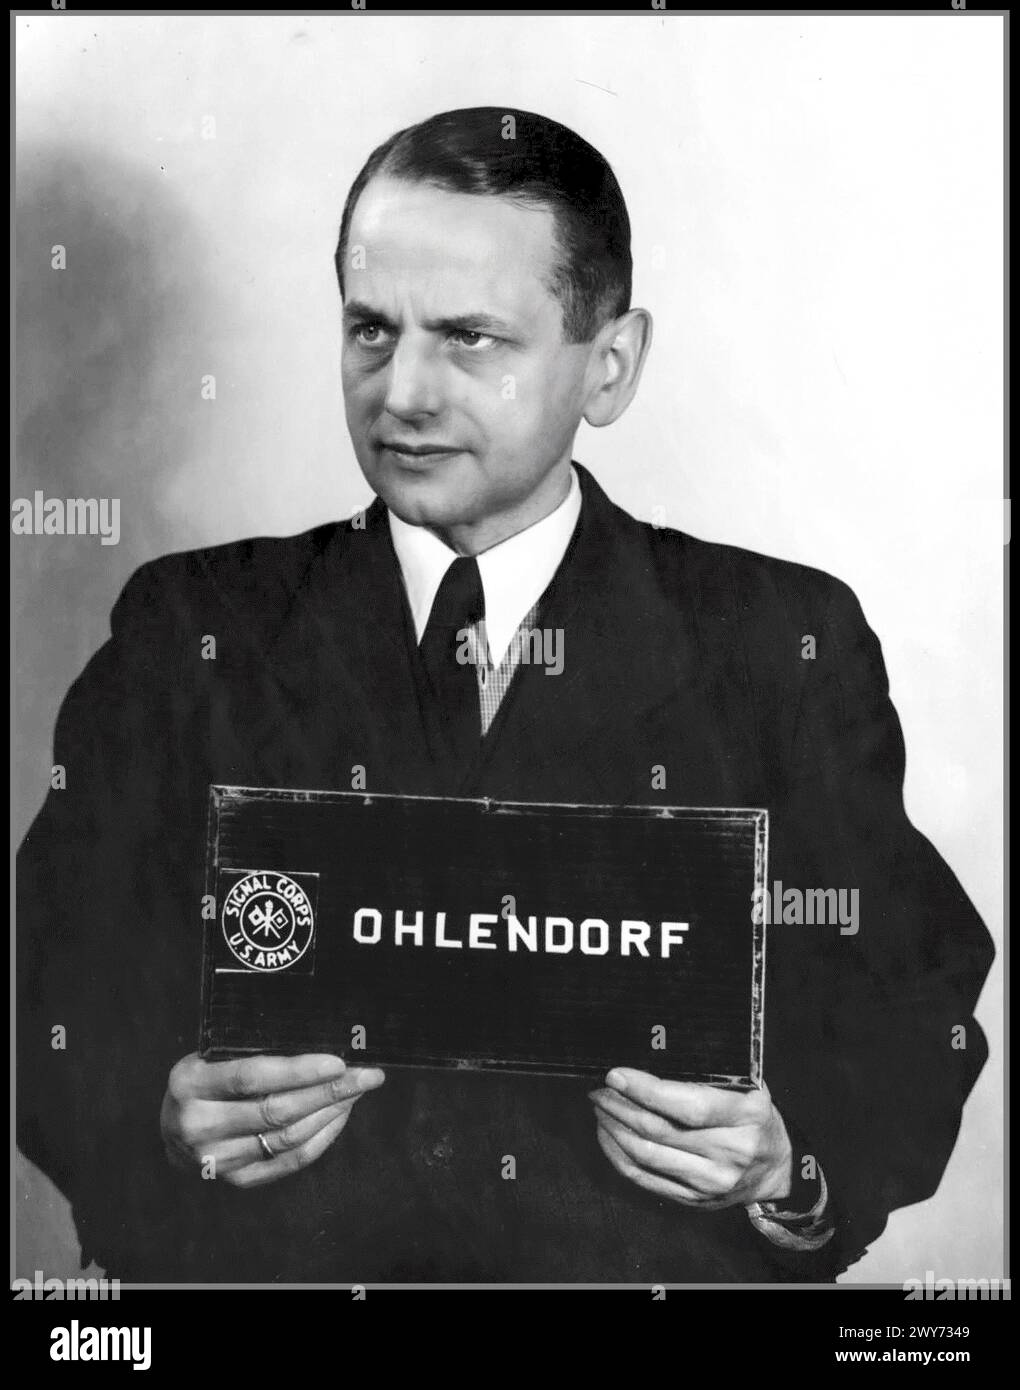 NAZI NUREMBERG TRIALS Former SS Gruppenführer Otto Ohlendorf (1907-1951) during the Nuremberg Einsatzgruppen Trials. 1948  Otto Ohlendorf  4 February 1907 – 7 June 1951) was a particularly odious German SS functionary and Holocaust perpetrator during Nazi era. An economist by education, he was head of Sicherheitsdienst (SD) Inland, responsible for intelligence and security within Germany. In 1941, Ohlendorf appointed commander Einsatzgruppe D, which perpetrated mass murder in Moldova, south Ukraine, the Crimea and, during 1942, the North Caucasus.Tried and executed by hanging in 1951 Stock Photo